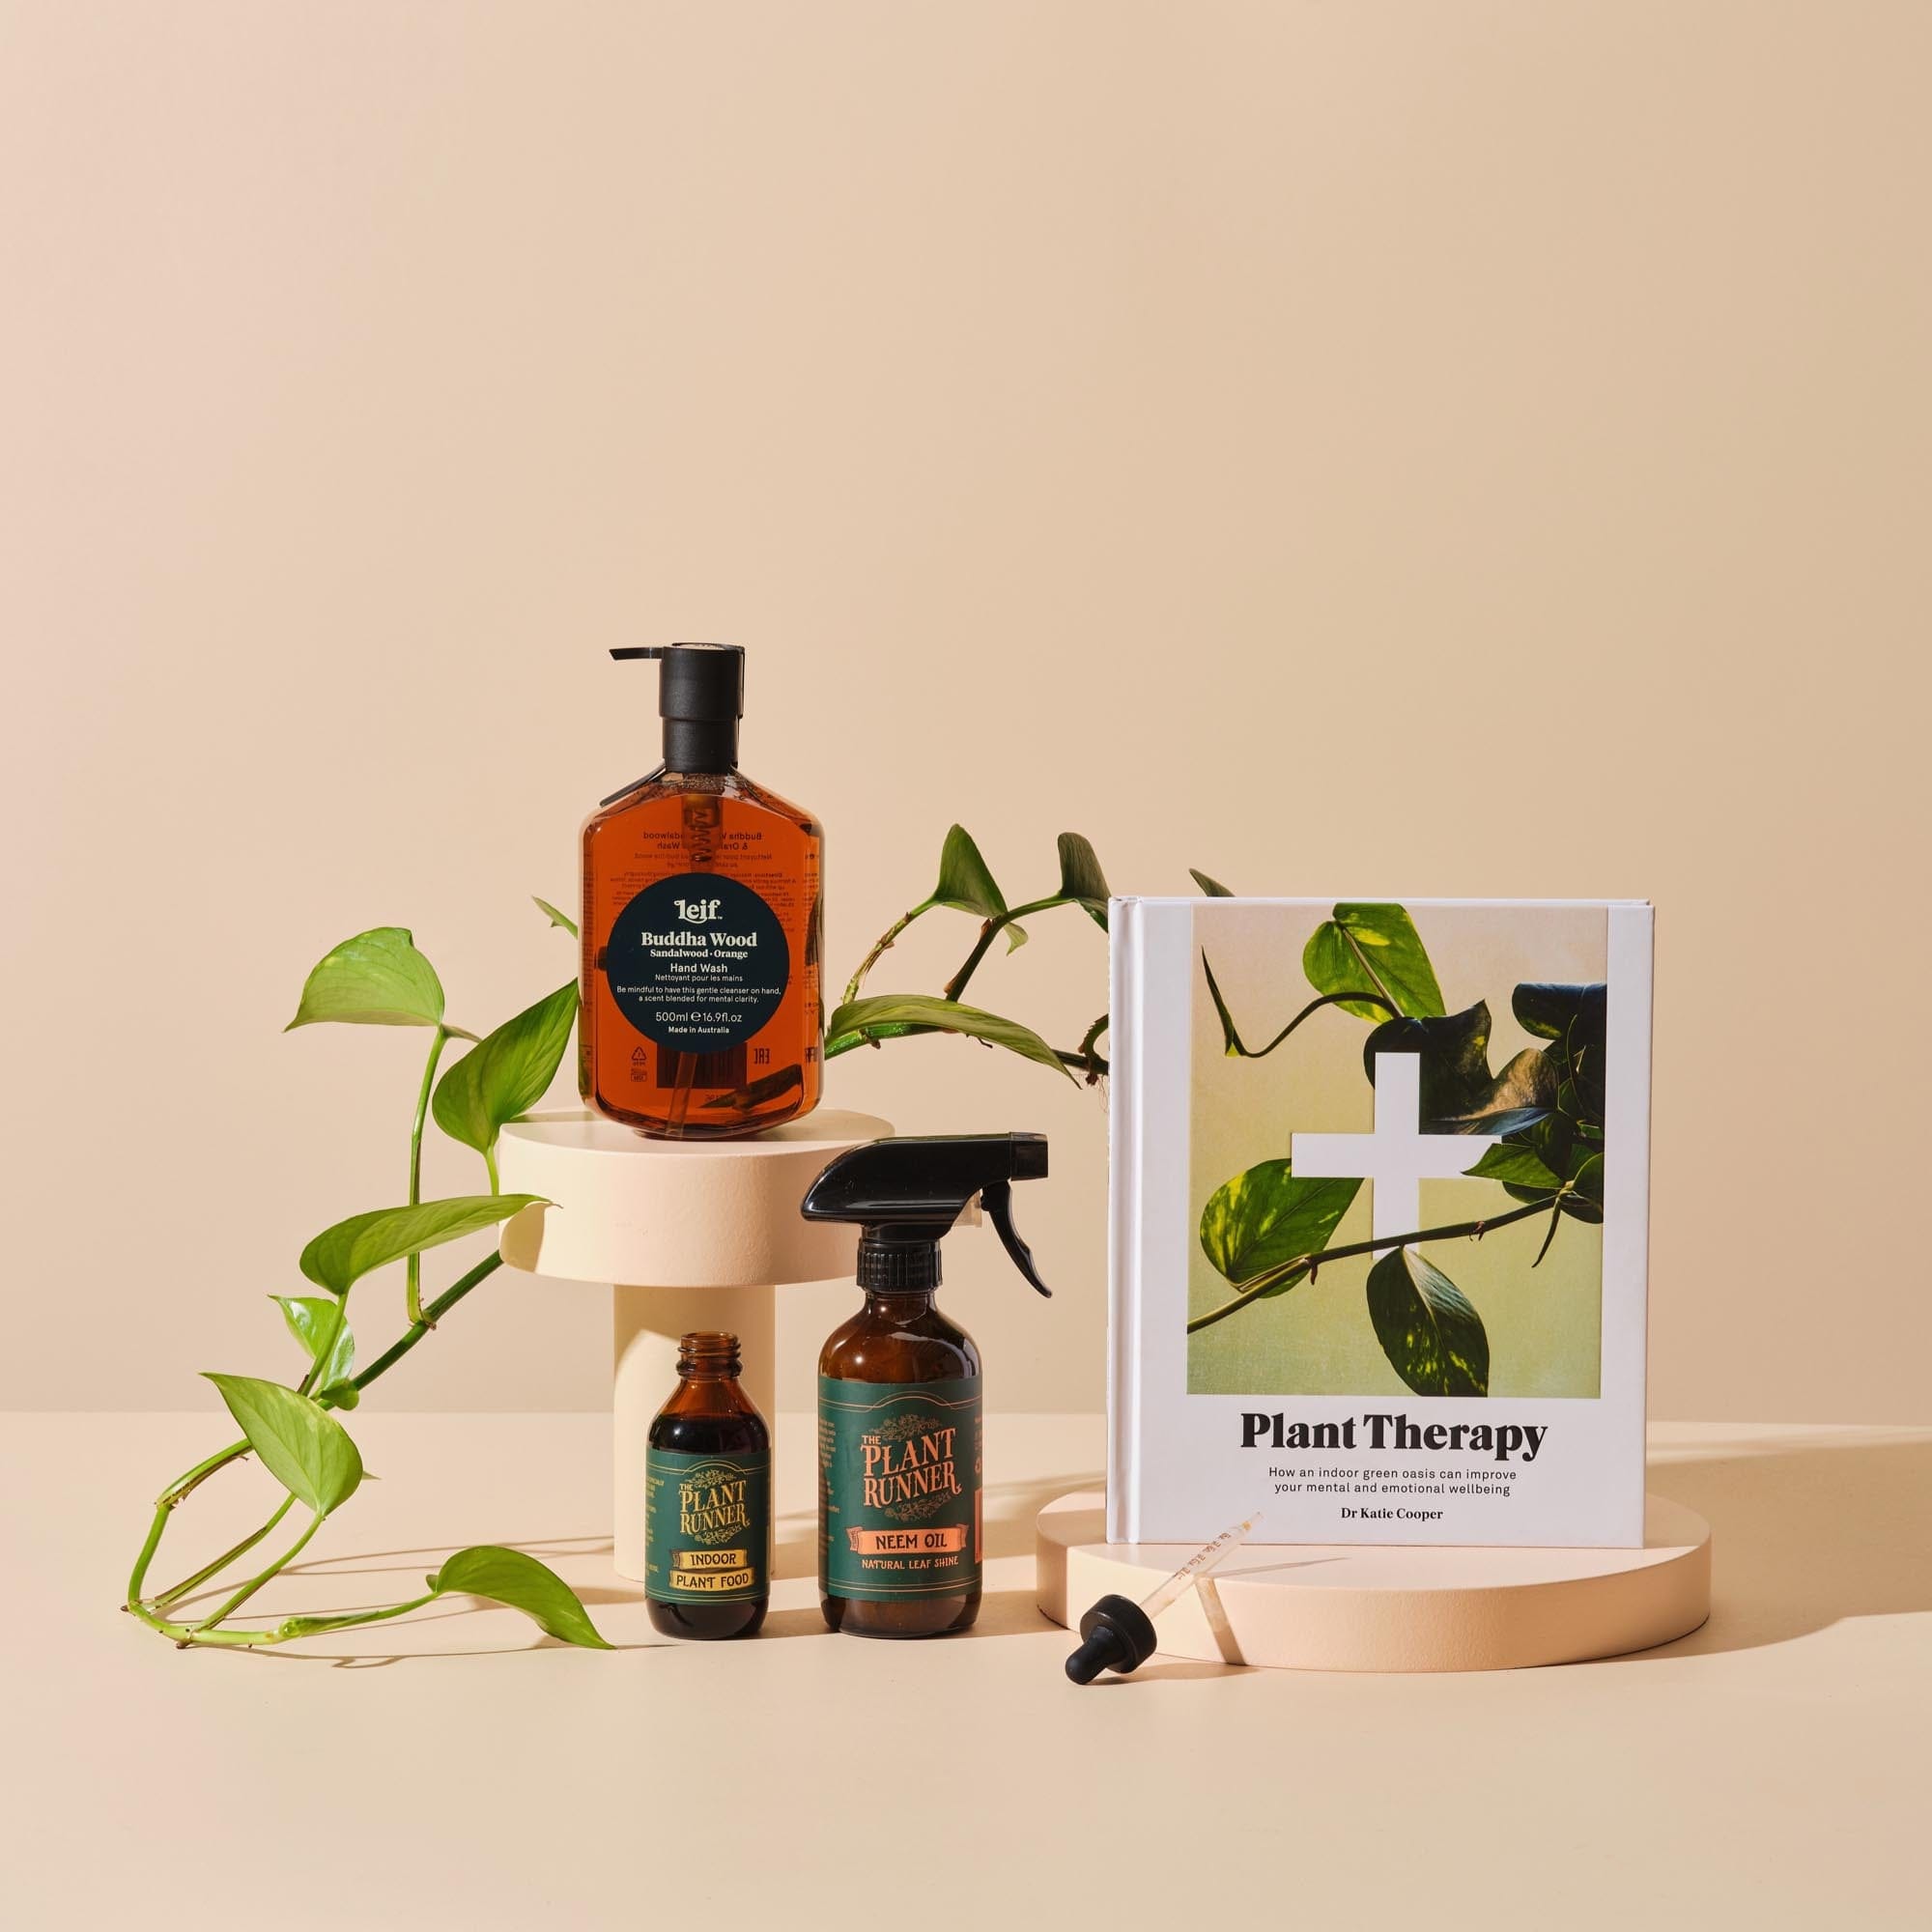 This is the Green Thumb bundle from Handsel. Included in this image is Plant therapy, Plant care essentials and Buddha wood handwash